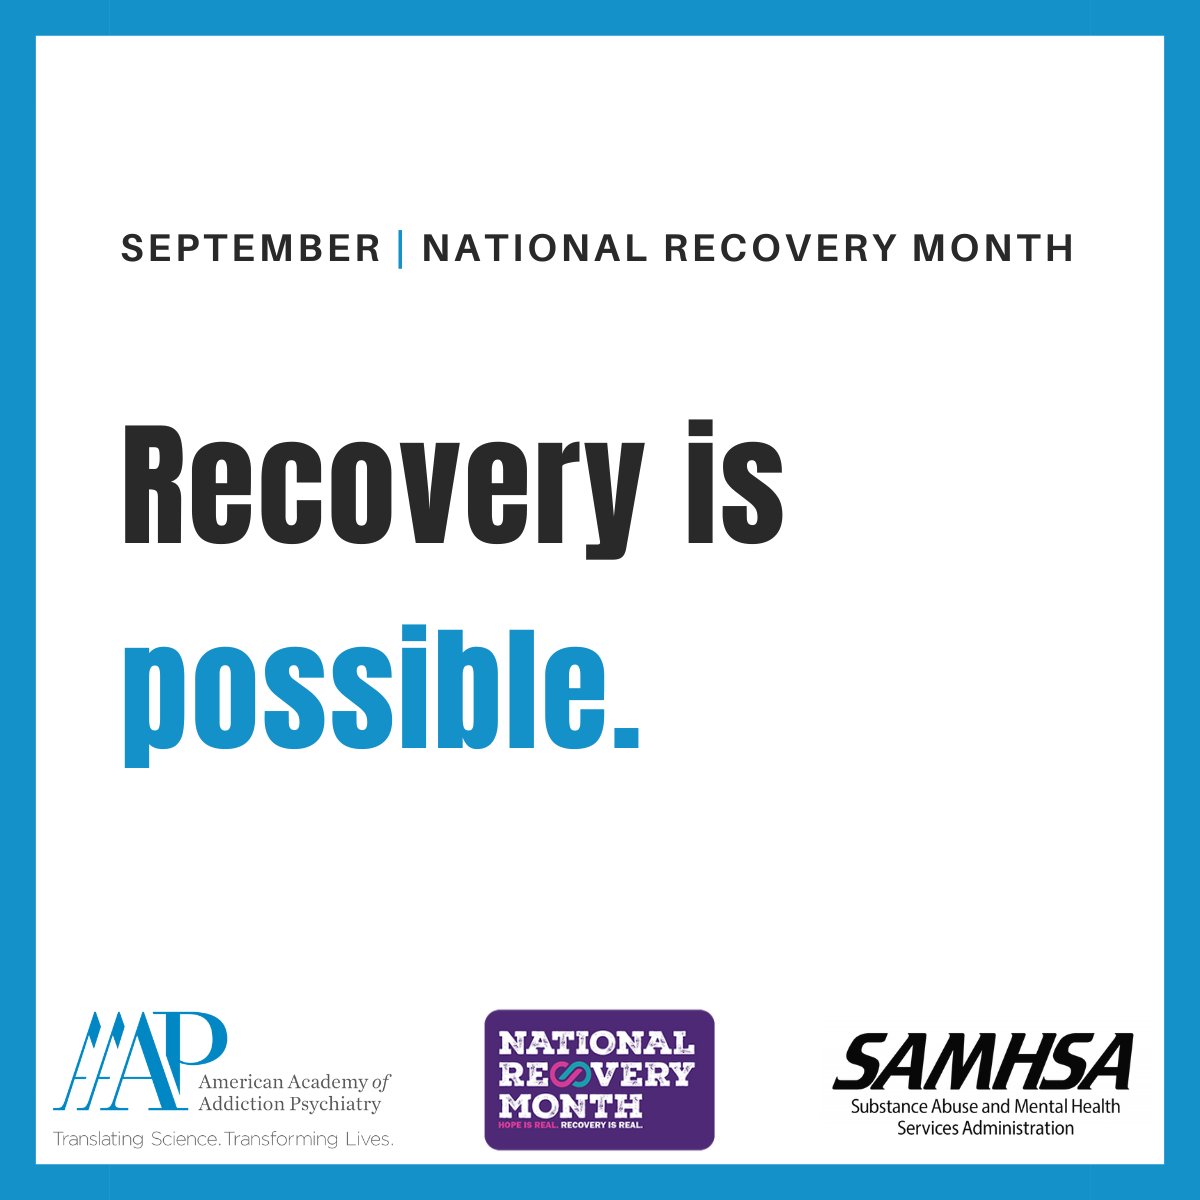 As we near the end of September and #RecoveryMonth, we take a moment to reflect on how far we've come in treating addiction, and the work that still needs to be done. We must continue prioritizing access to education, support, and resources to reduce misuse and save lives. (1/3)